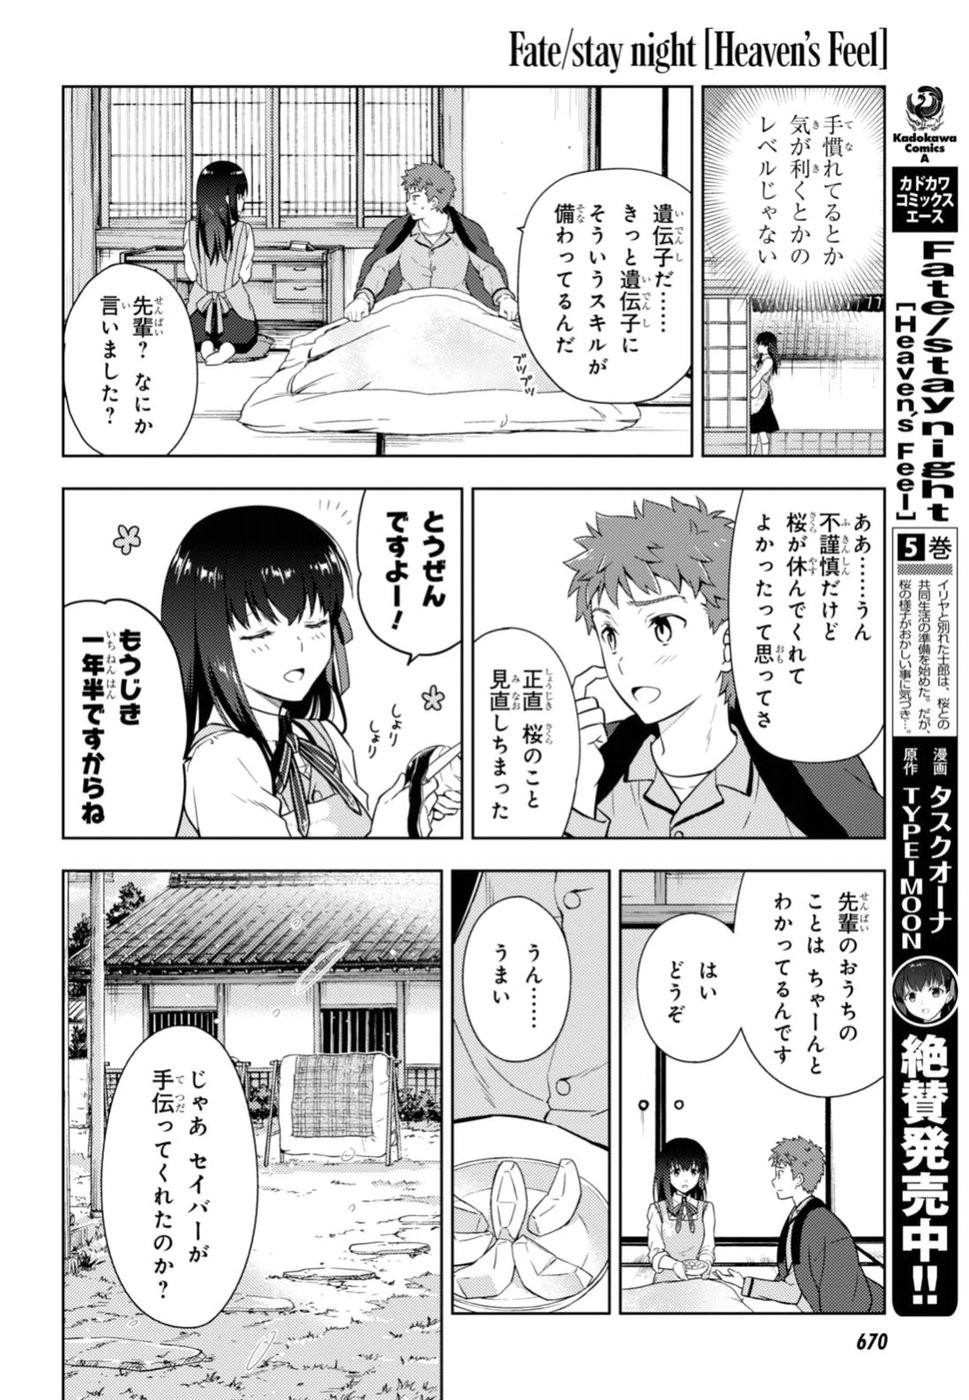 Fate/Stay night Heaven's Feel - Chapter 33 - Page 4